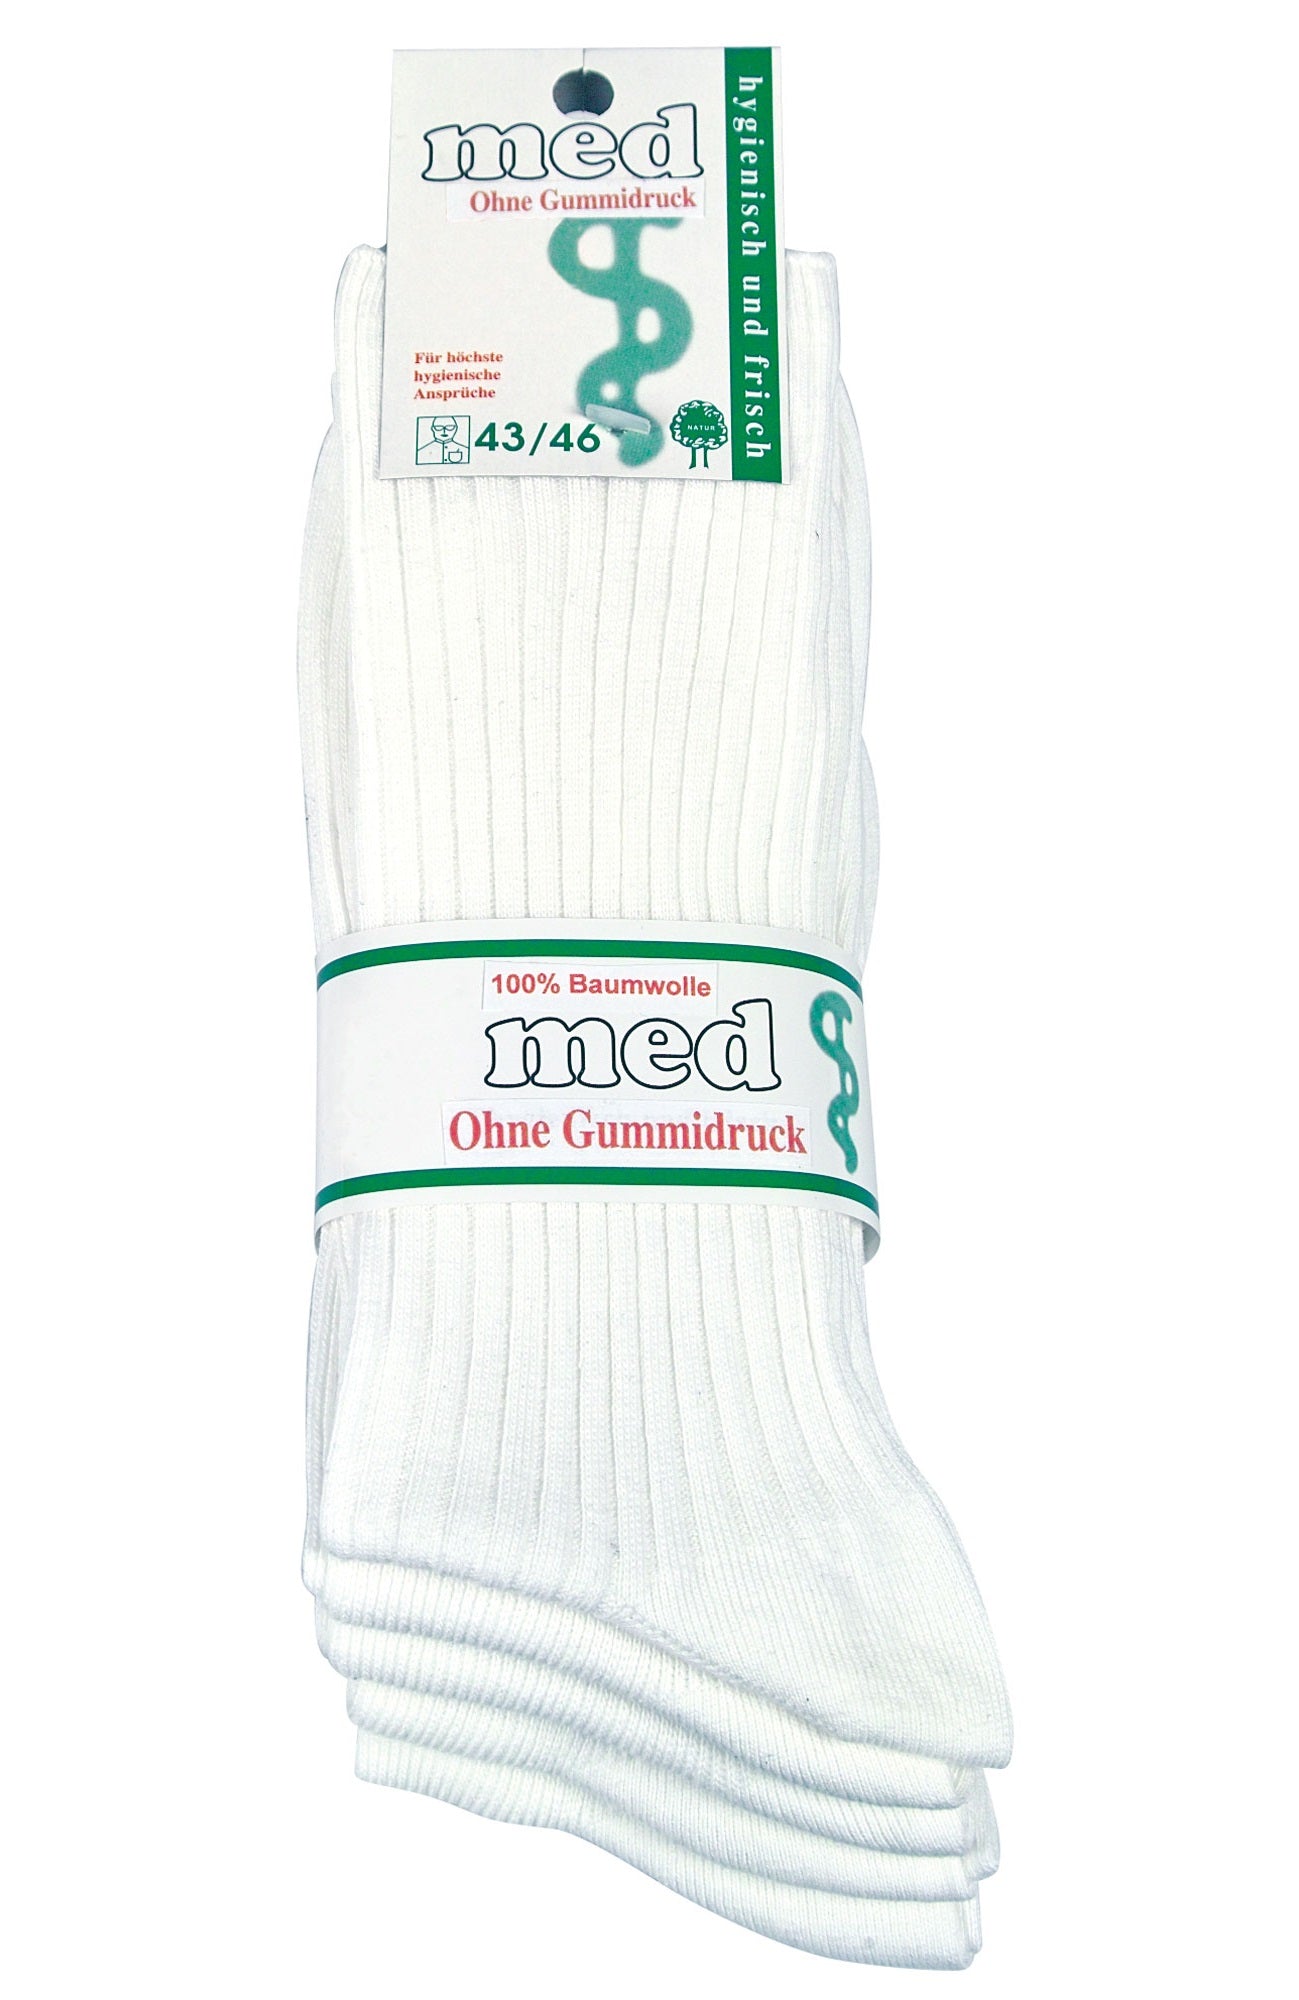 5-20 pairs of boil-proof doctor and nurse socks 100% cotton without rubber print, white